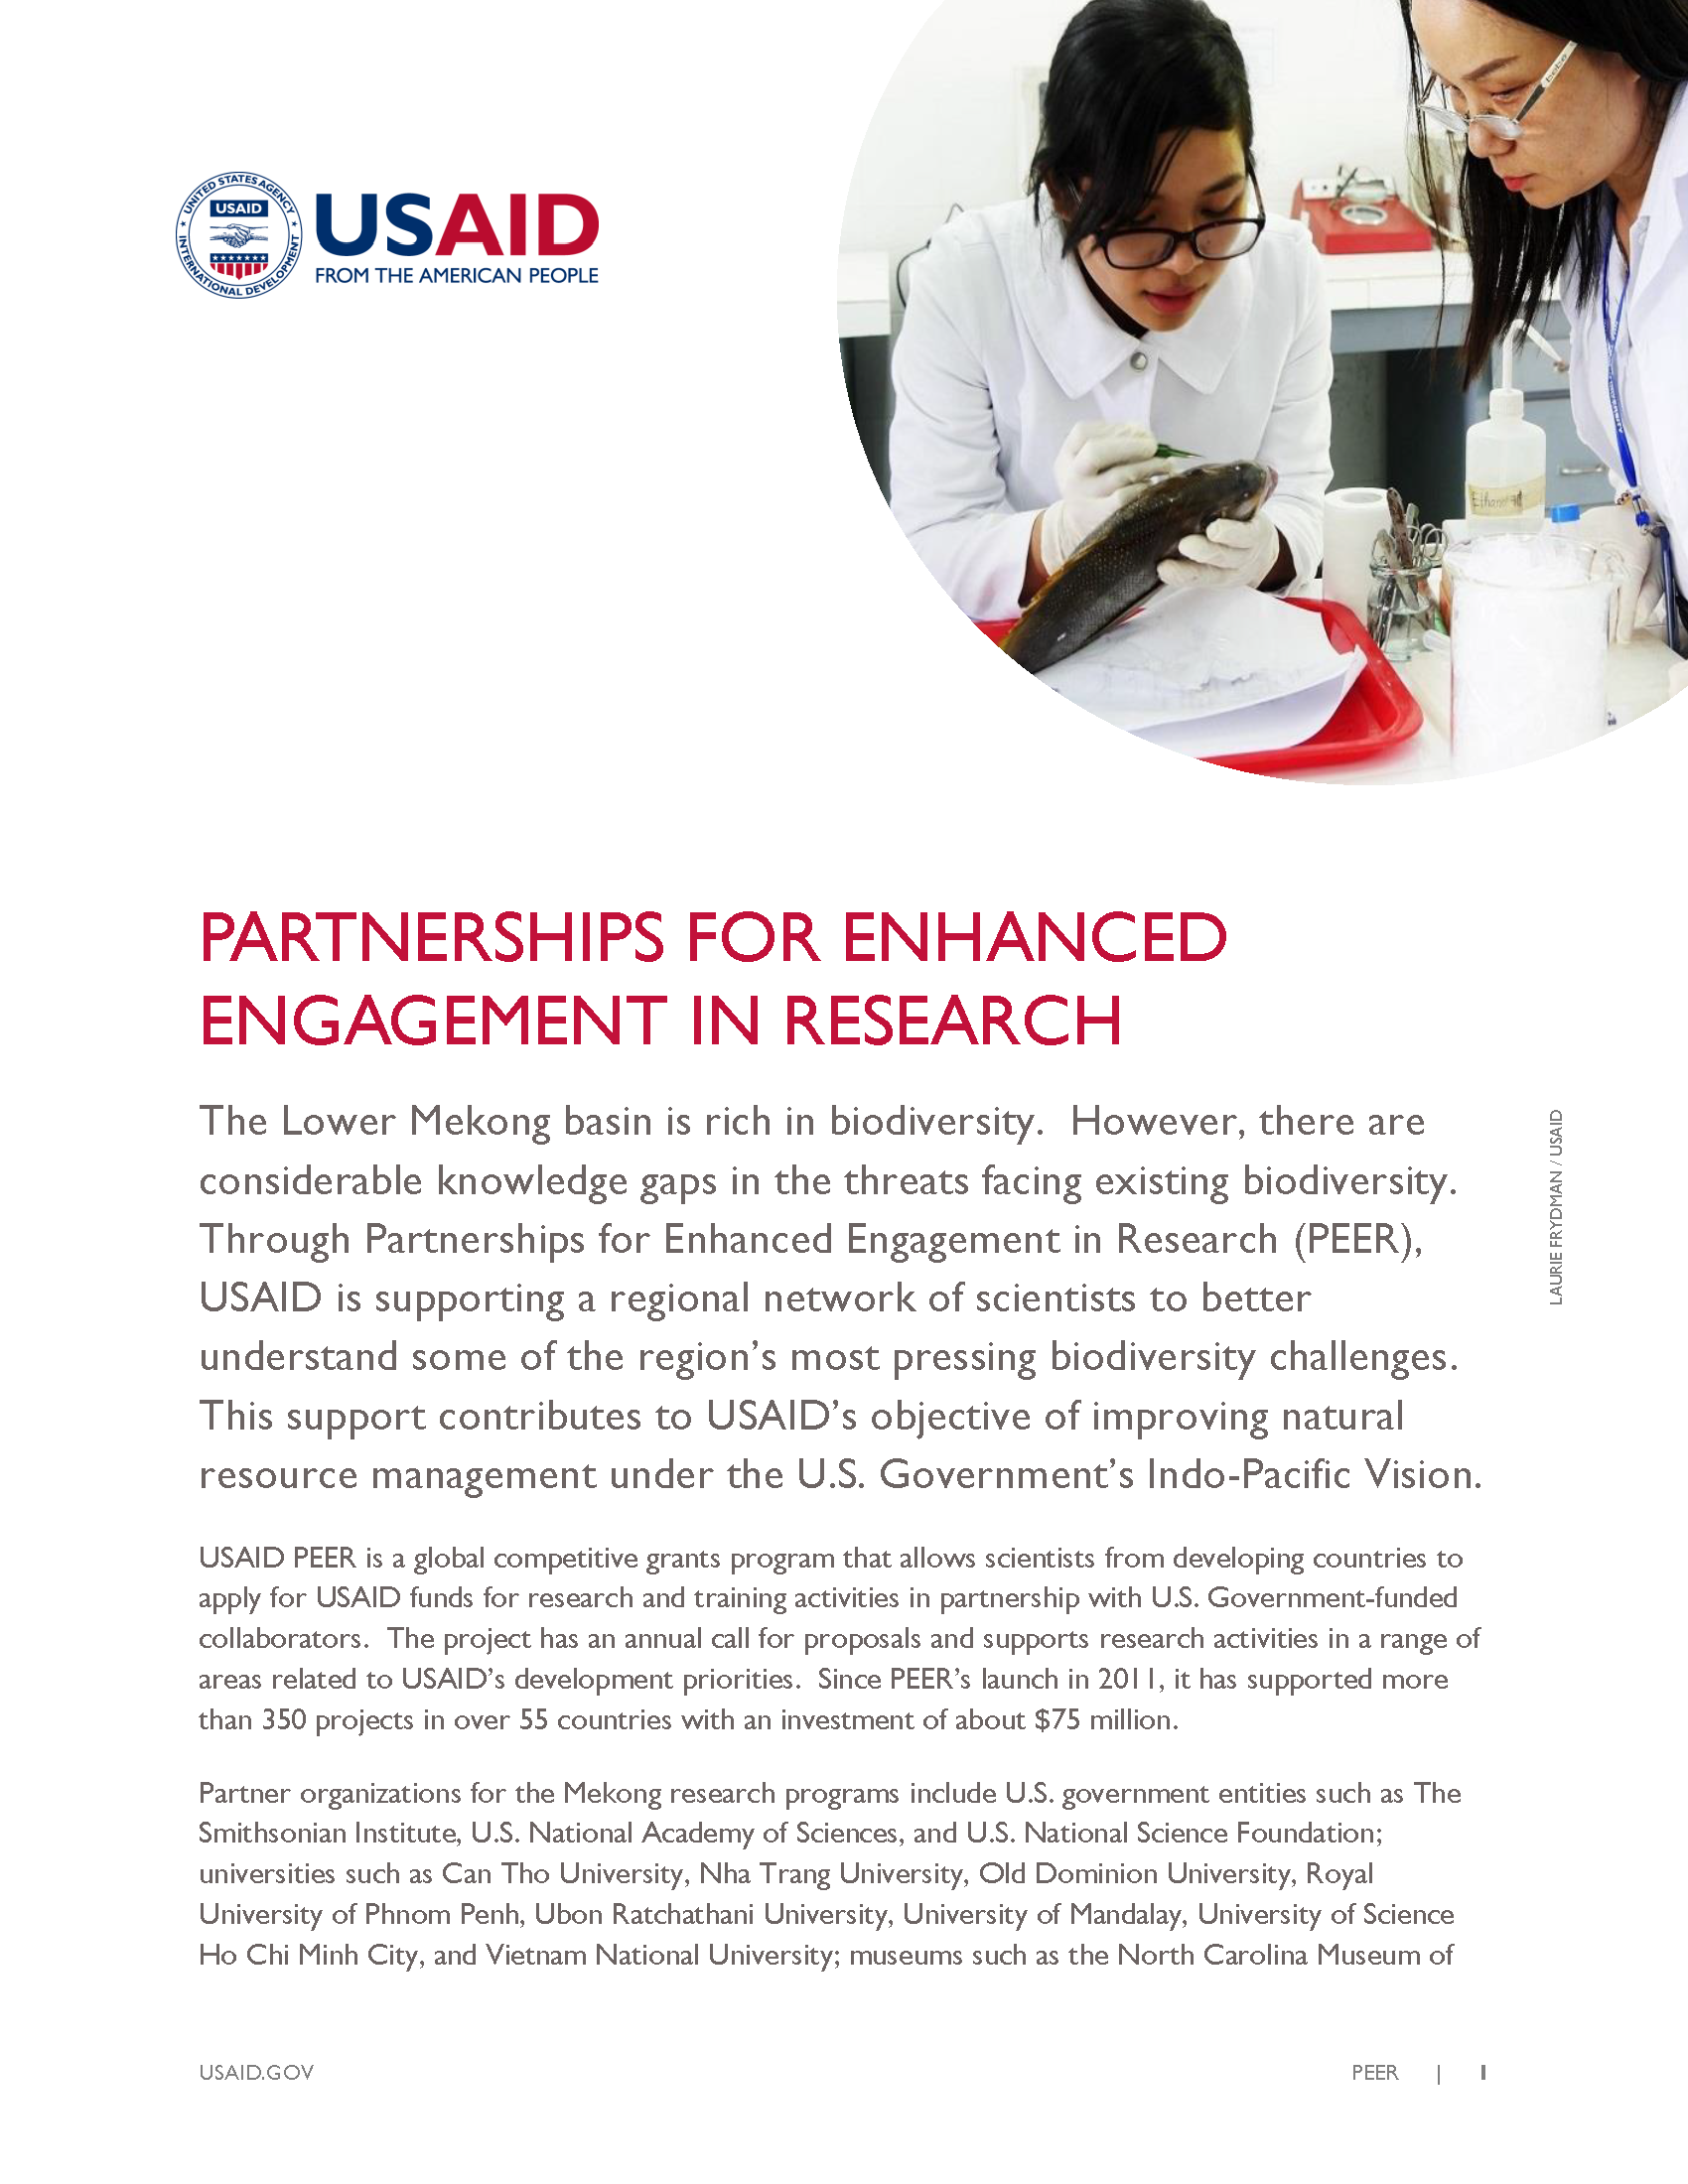 Partnership for Enhanced Engagement in Research